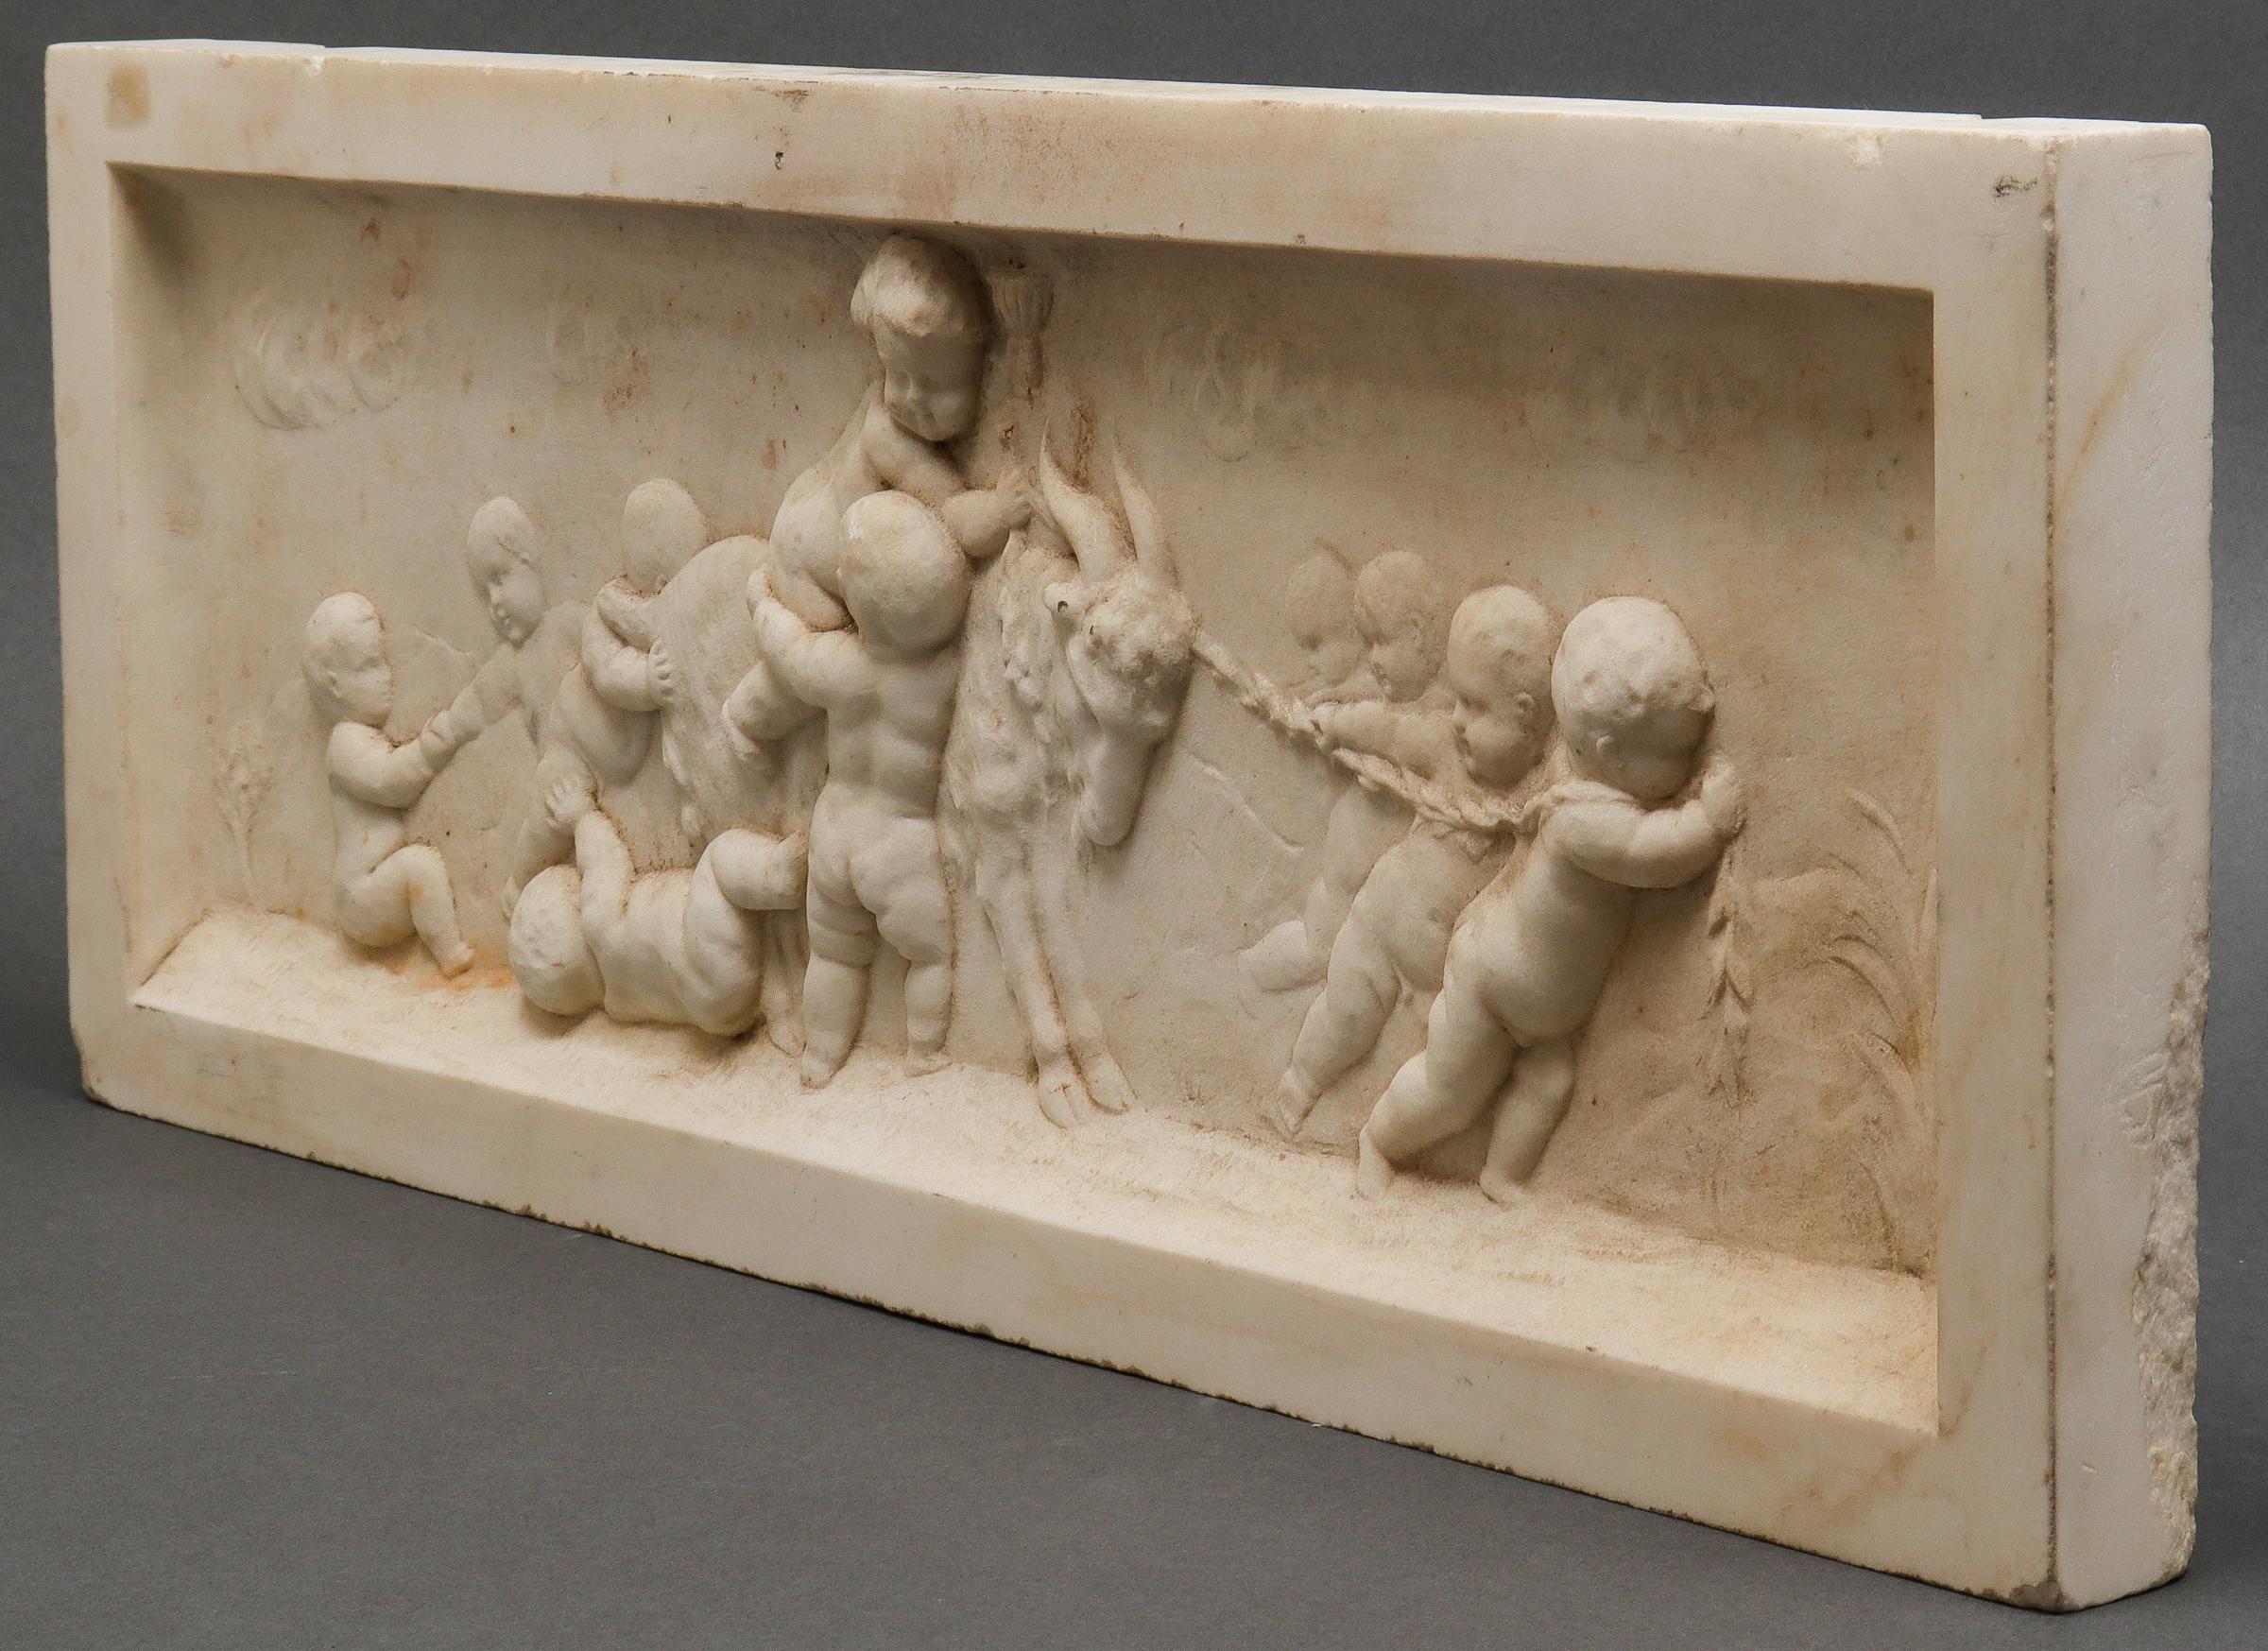 Neoclassical carved marble architectural relief or frieze plaque with a bas-relief scene depicting playful cherubs leading a goat. In great antique condition with age-appropriate wear.